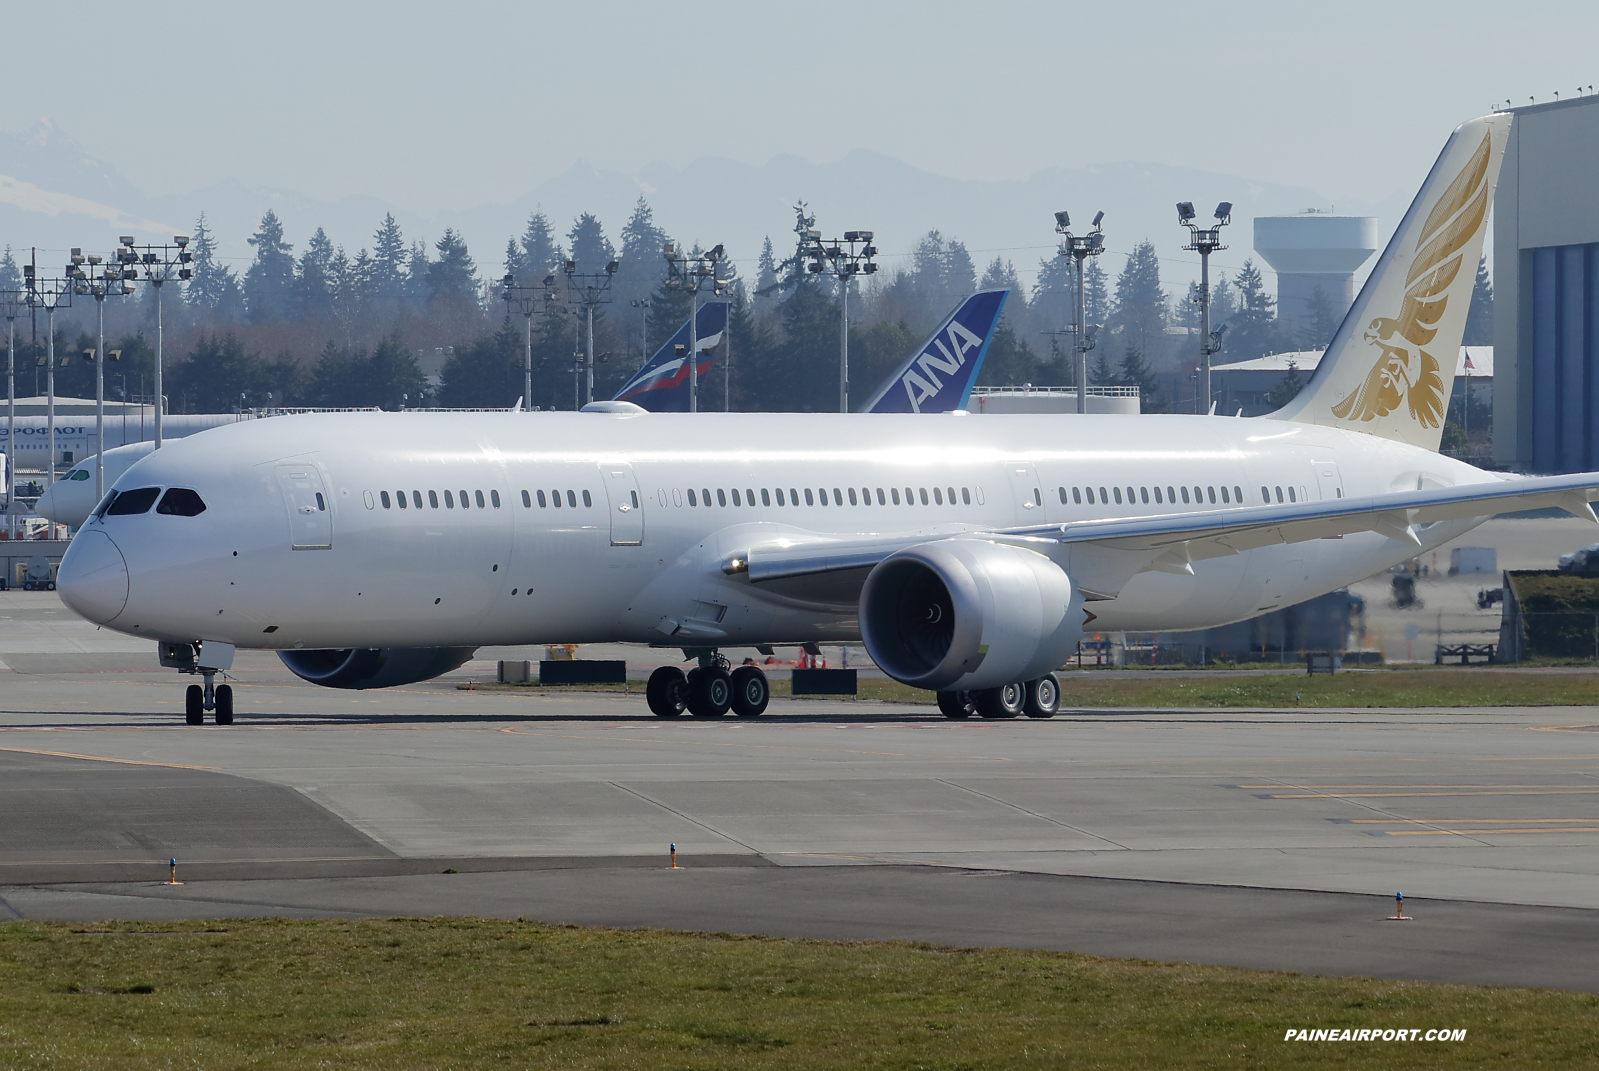 Gulf Air 787-9 line 997 at Paine Field